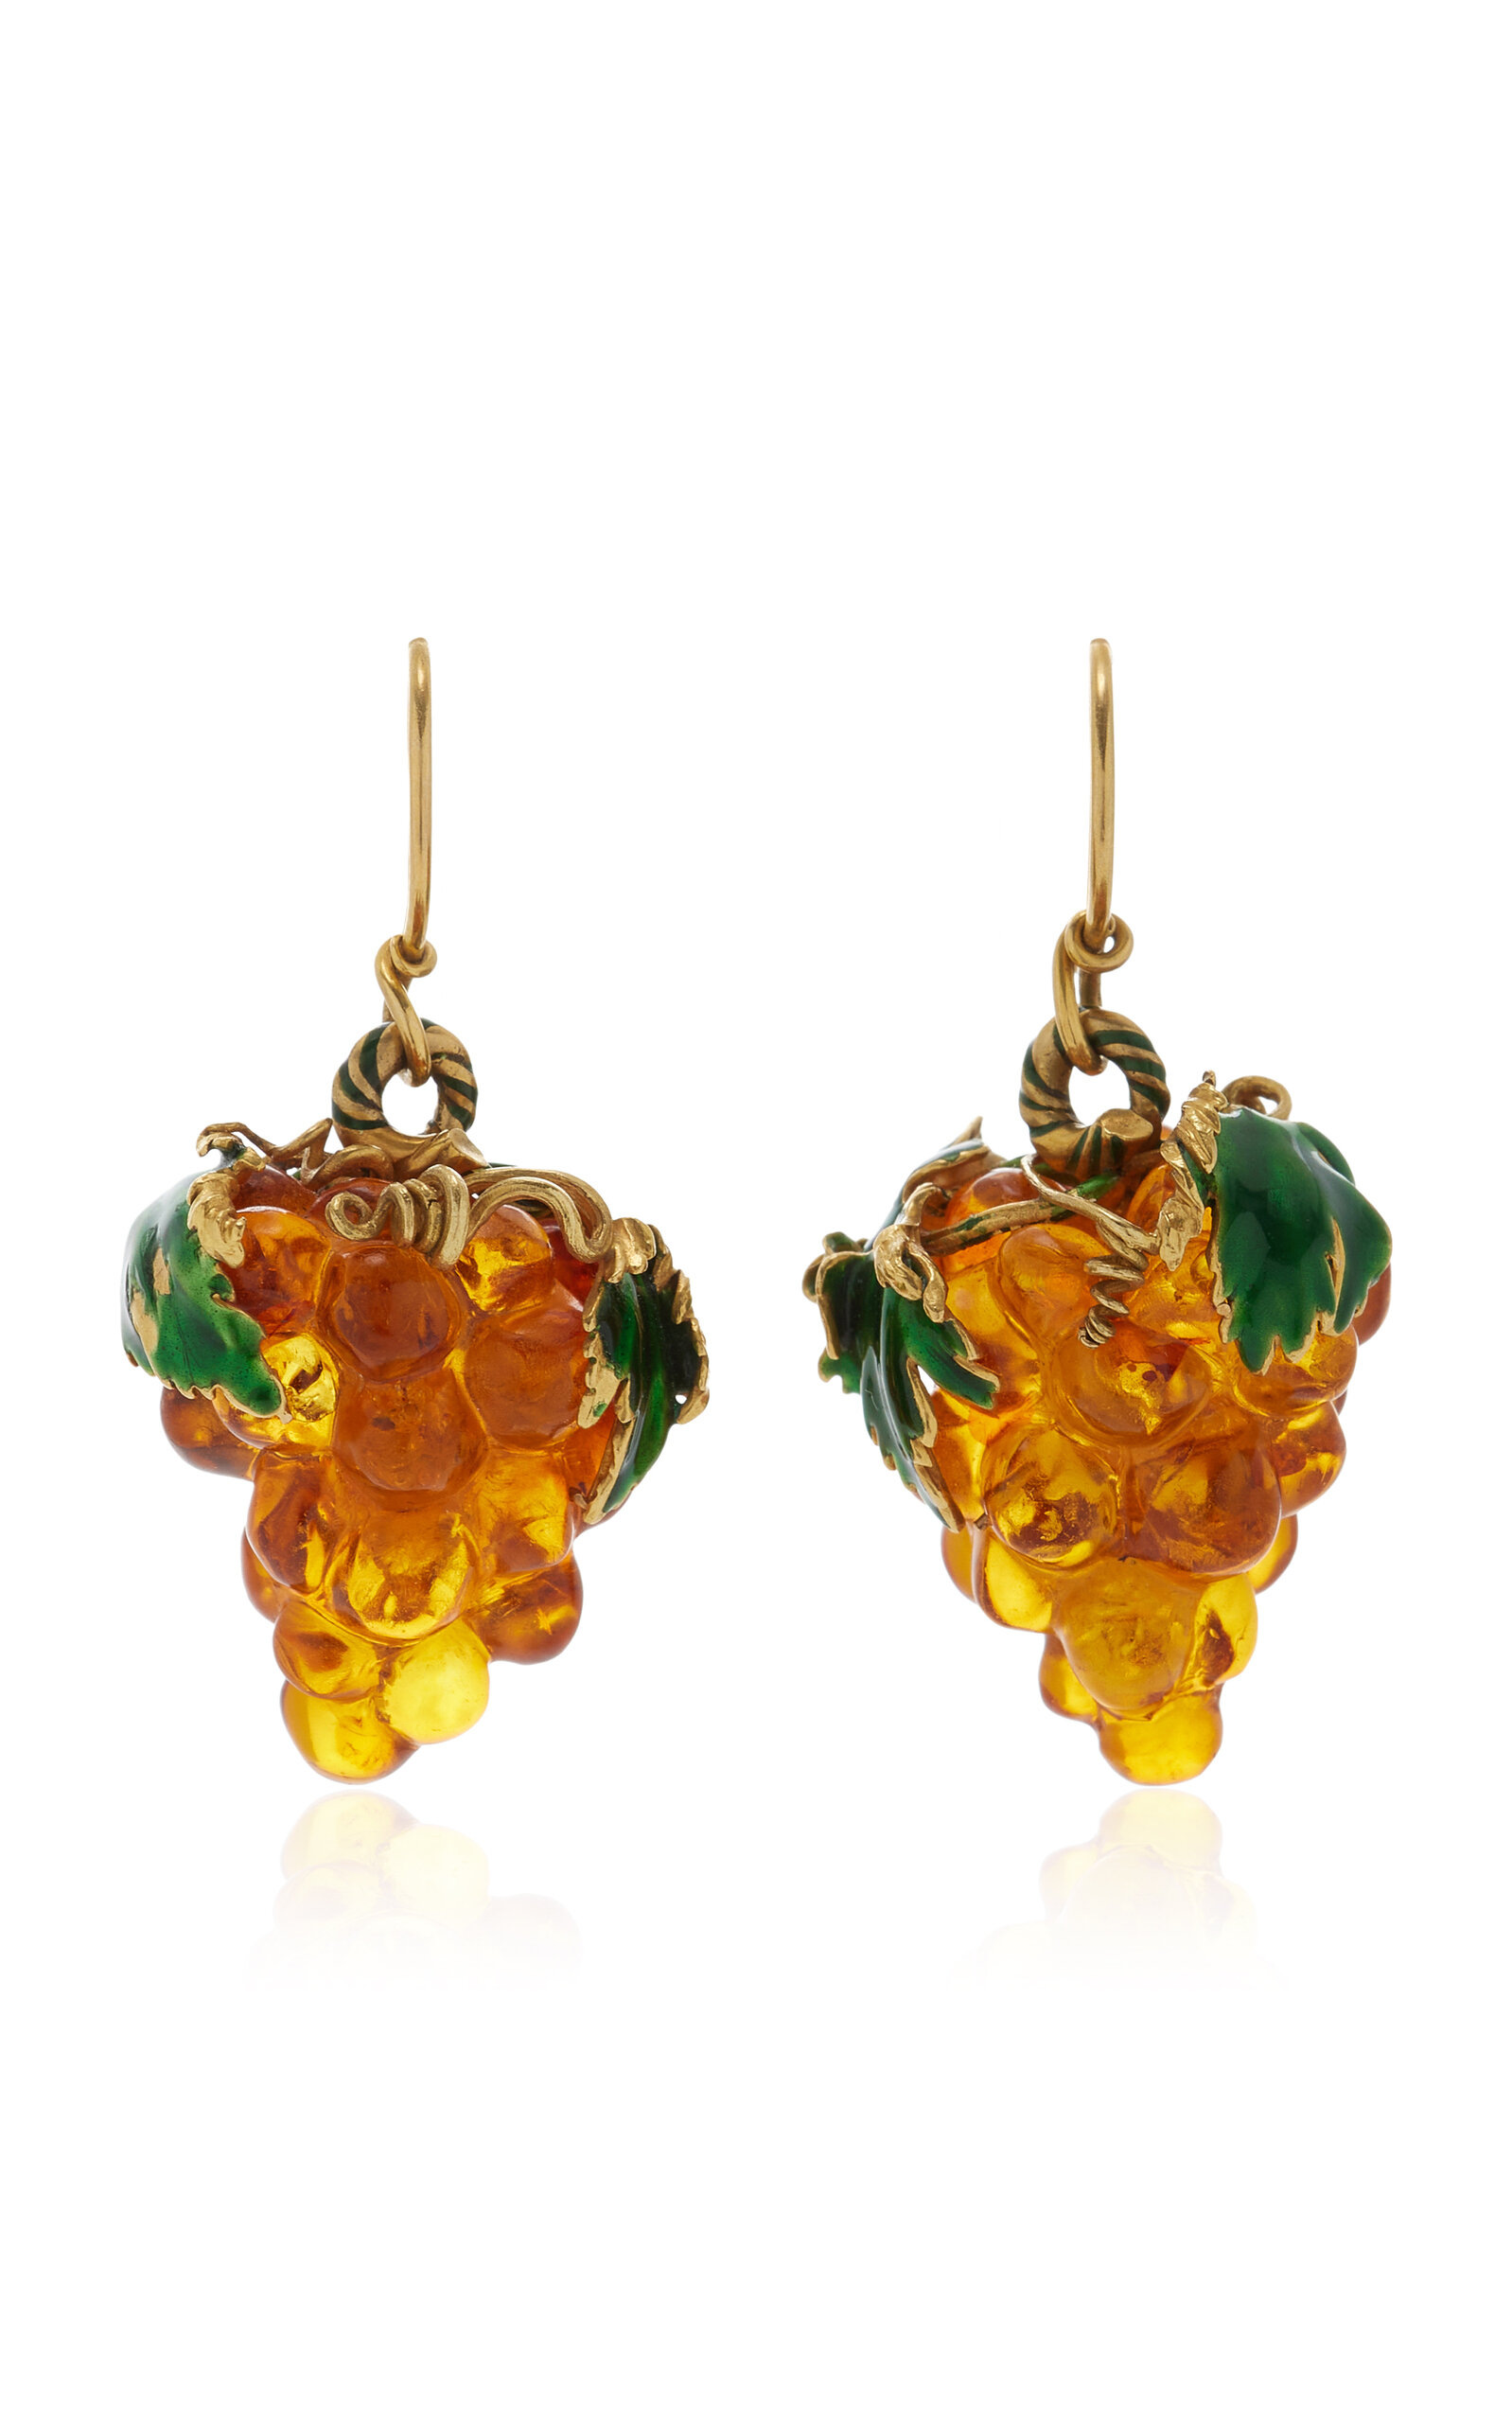 One-of-a-Kind 18K Yellow Gold Carved Amber and Green Enamel Grape Earrings